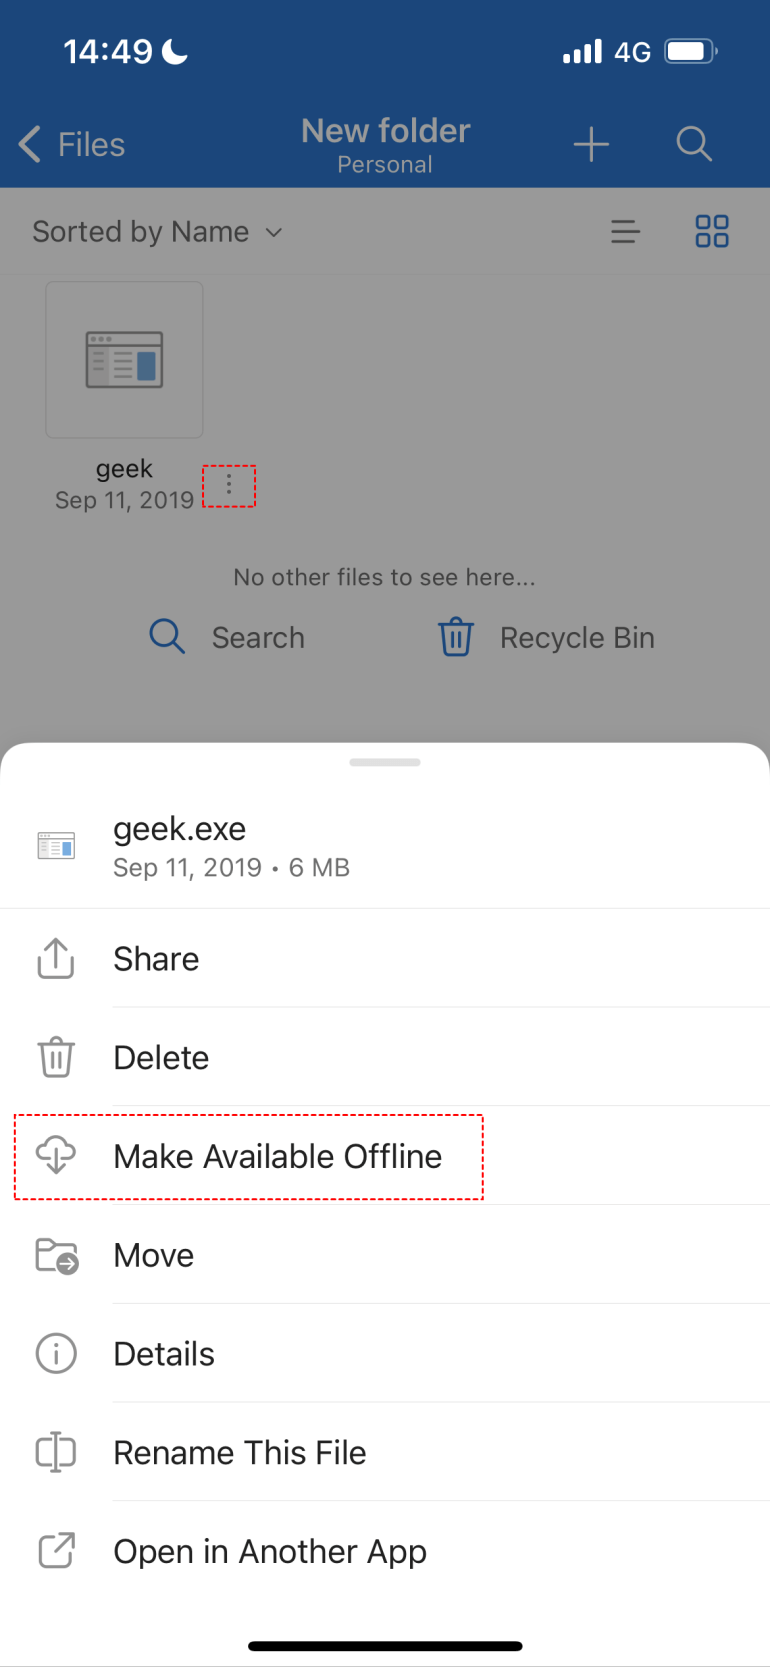 Make Available Offline